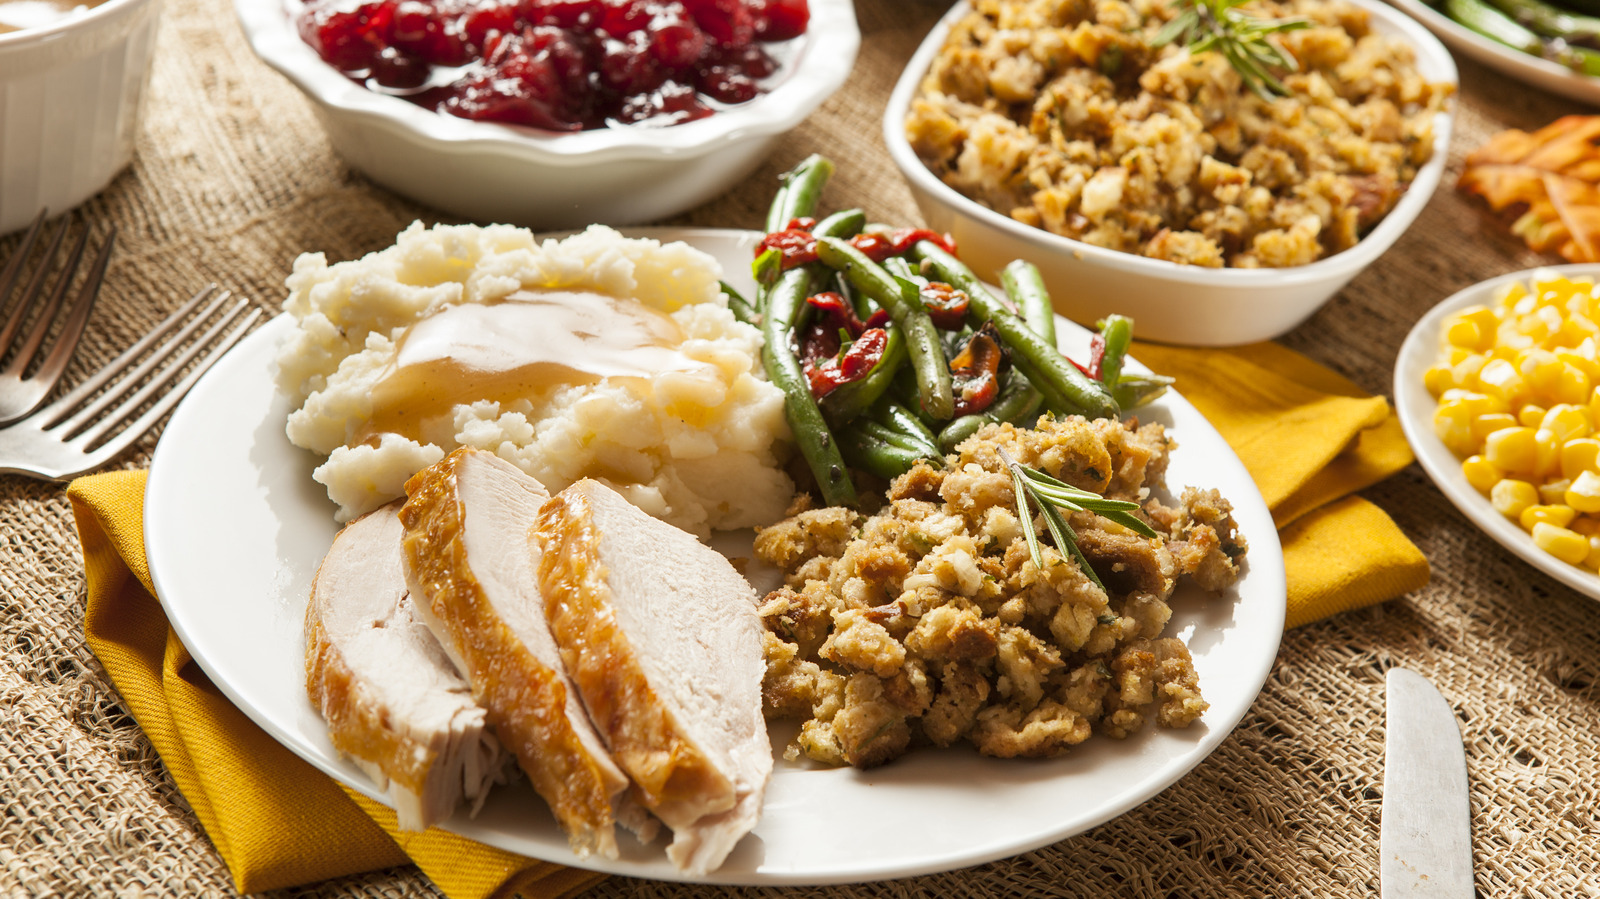 Costco Thanksgiving Dinner Meal Kit: Everything You Need to Know